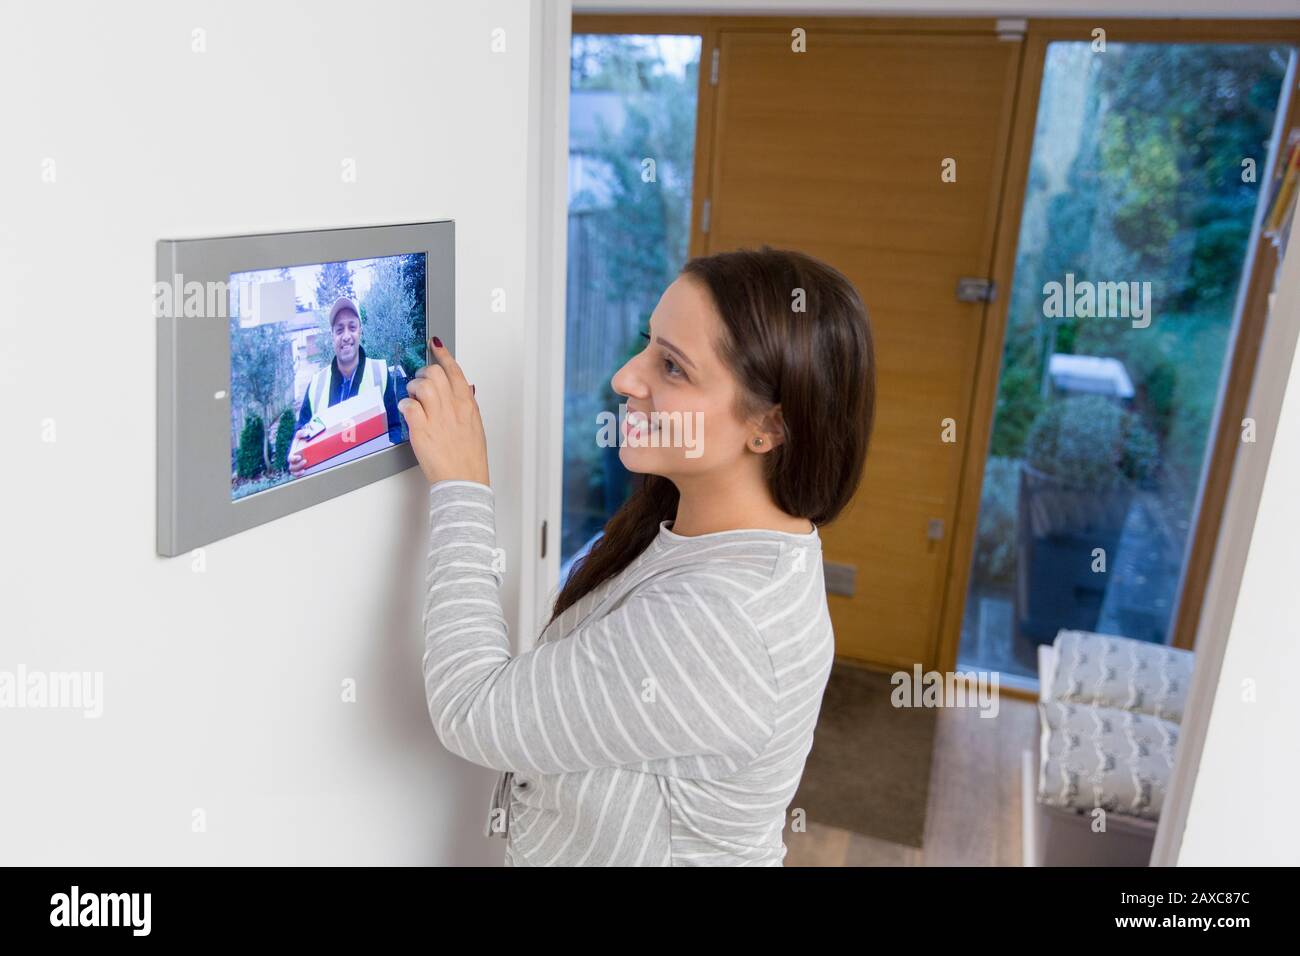 Smiling woman watching deliveryman approaching front door from smart home automation screen Stock Photo